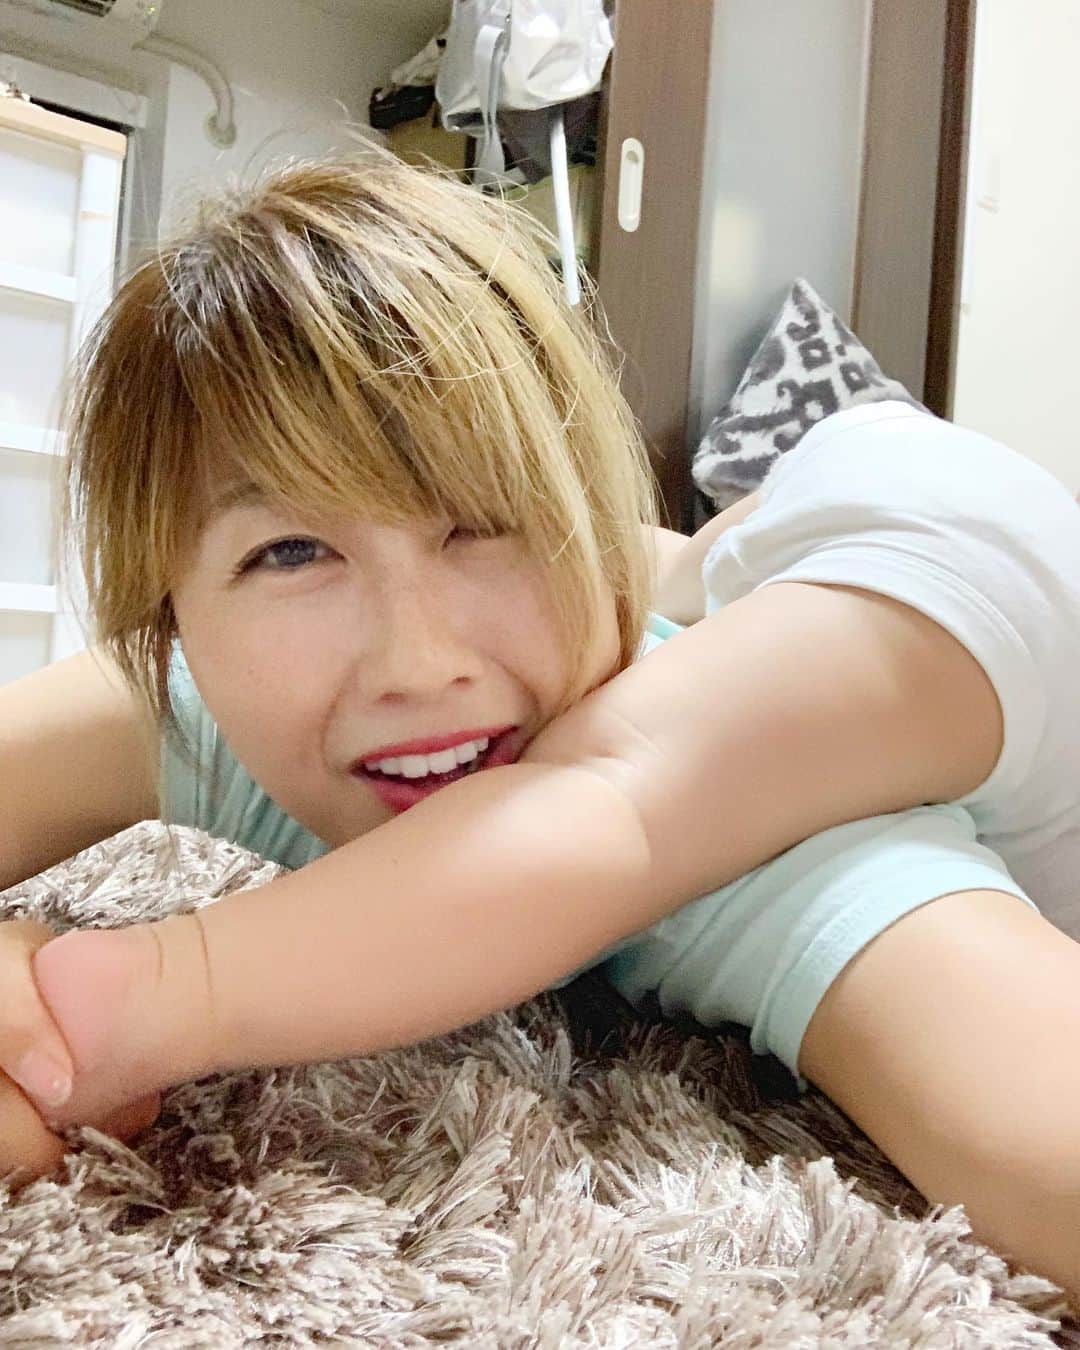 吉田ちかさんのインスタグラム写真 - (吉田ちかInstagram)「Hey guys! We’re back in Japan in our little apartment and despite the jet lag, Pudding is super energetic and I literally can’t keep up. ﻿ ﻿ Sorry it took so long to post an update. Things have been pretty hectic with work and family  in addition to taking care of the crazy one year old that chases me around everywhere lol ﻿ ﻿ Osaru-san finished his one-month English course in Cebu and we’re going to go pick him up at the airport today! We’ll be giving you guys and update on his whole experience later this month! I hope to come back with new videos next week! Oh, and btw, we’re going to Guam later this week to make some travel videos with the Guam Visitors Bureau!! Busy beyond belief, but so excited to visit Guam for the first time! ﻿ ﻿ 先日プリンと無事帰国し、日本の小さなお家に戻ってきました！若干時差ボケですが、プリンは元気すぎてついていけません🤣﻿ ﻿ 帰国についてなかなかアップデートできてなくてごめんなさい！戻ってからお仕事もプライベートも色々と忙しくて... プラス、一歳の怪獣に常に襲われている毎日w ﻿ ﻿ おさるさんは、1ヶ月のフィリピン留学を終えて、今日帰国します！プリンと2人で迎えに行ってきます😊 おさるさん留学については、また詳しくアップデートしますね！YouTubeも来週から復活できたらと思っています☆ あ〜いつ編集するのか😱 あ、そして今週末からグアム政府観光局とのコラボでで1週間グアムに行ってきます✈️💦 信じられないほどバタバタですが、初グアム楽しみ！！」8月5日 13時37分 - bilingirl_chika